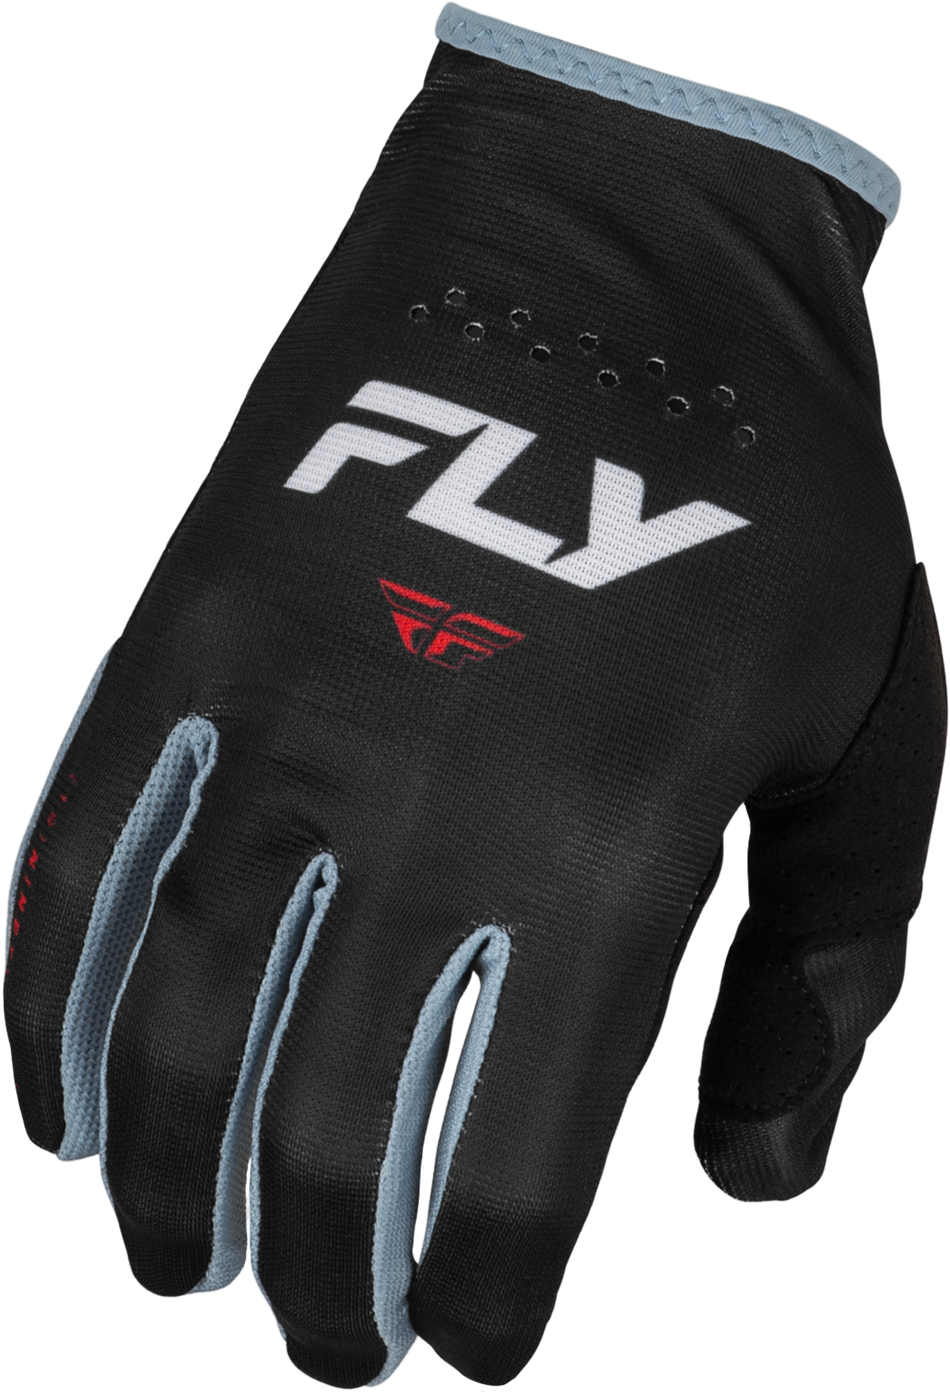 FLY RACING Lite Gloves Black/White/Red Md 377-710M